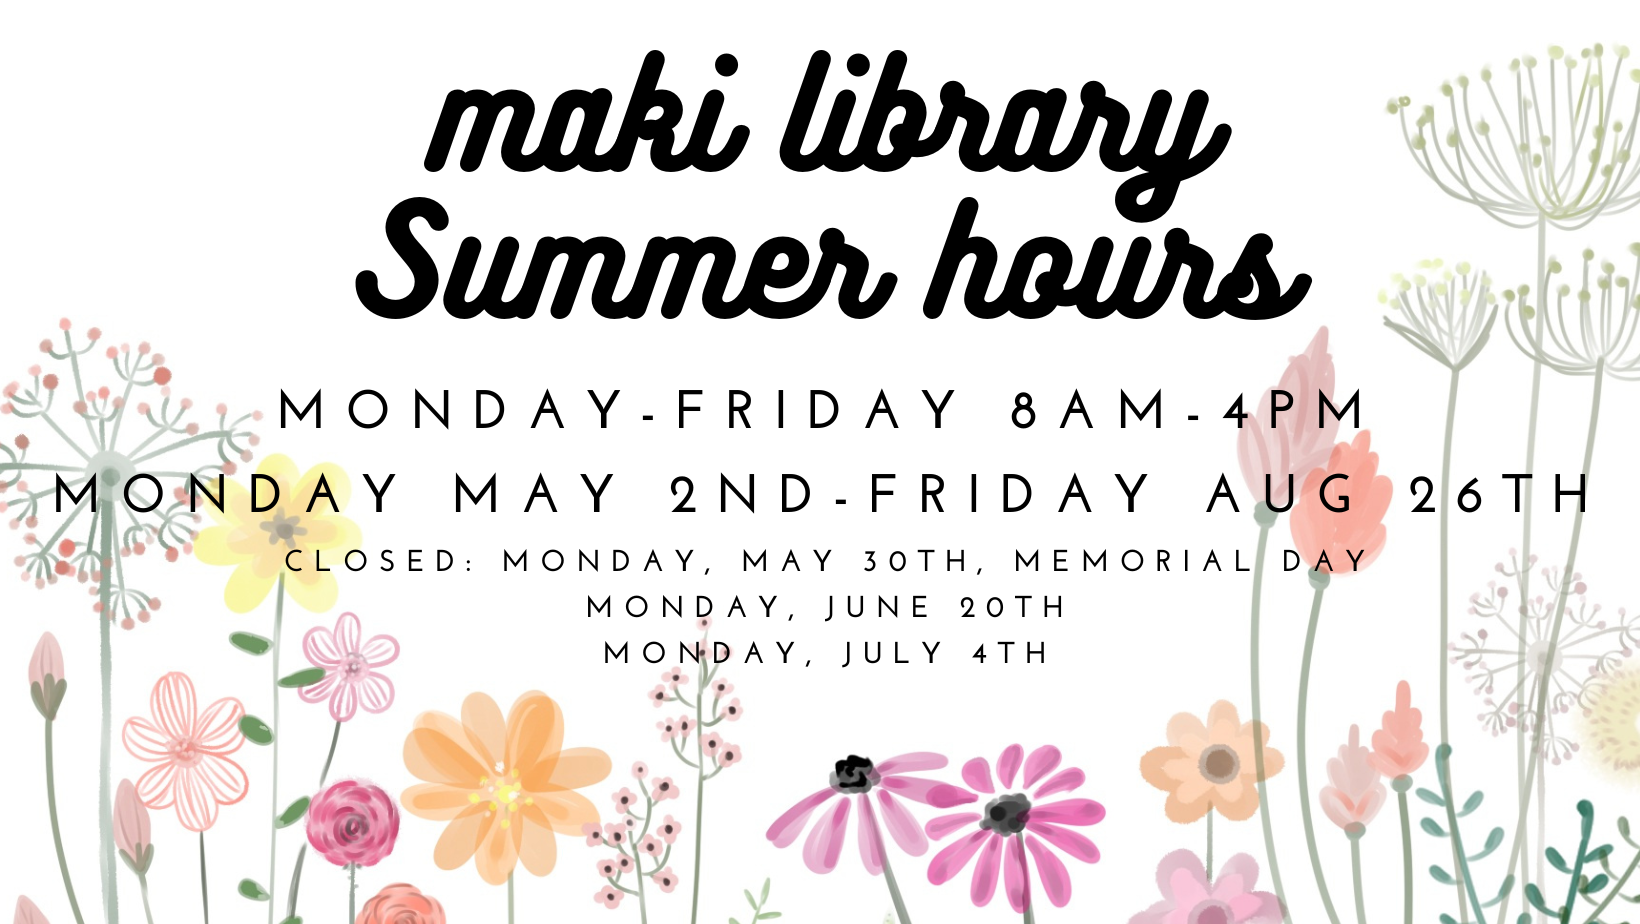 Library Summer hours 2022